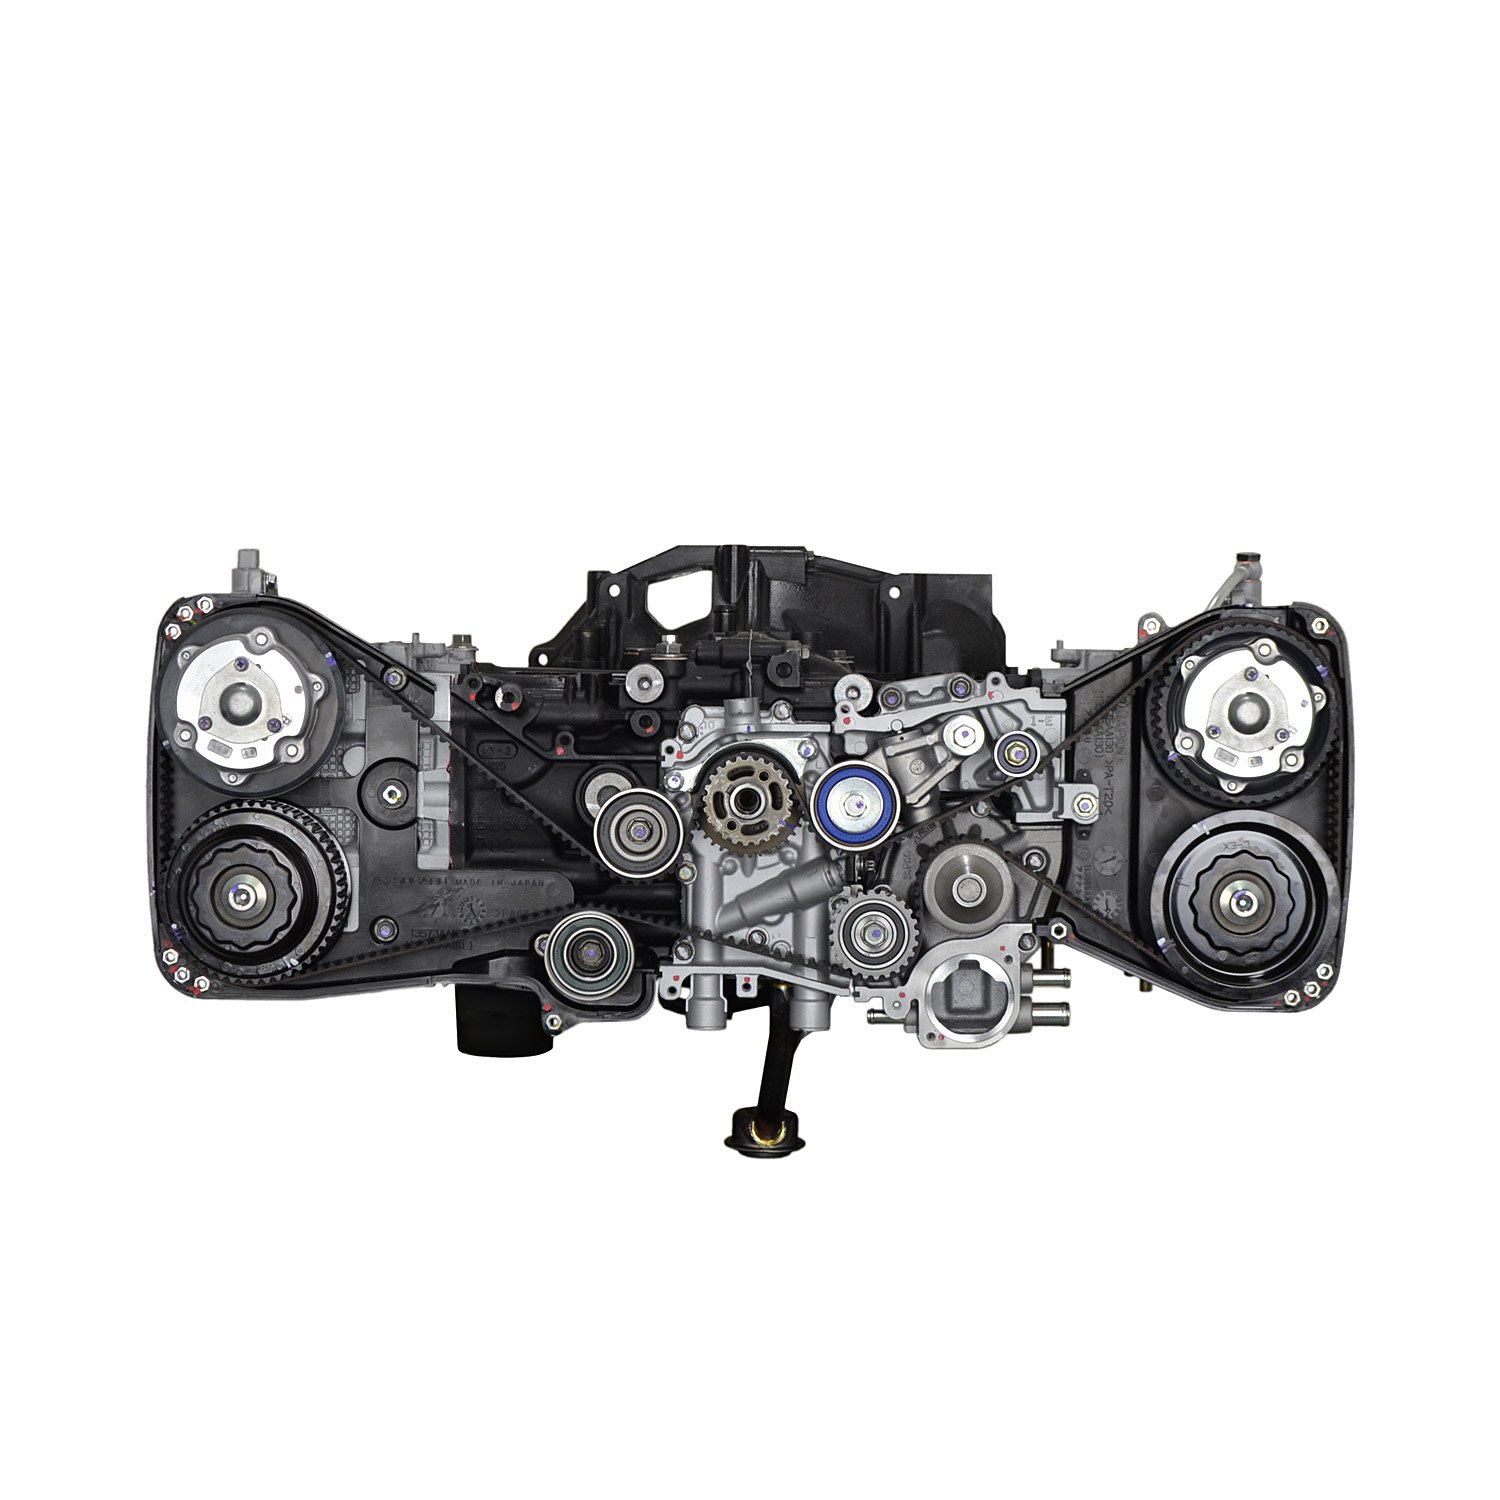 Remanufactured Crate Engine for 2006-2009 Subaru with Turbo